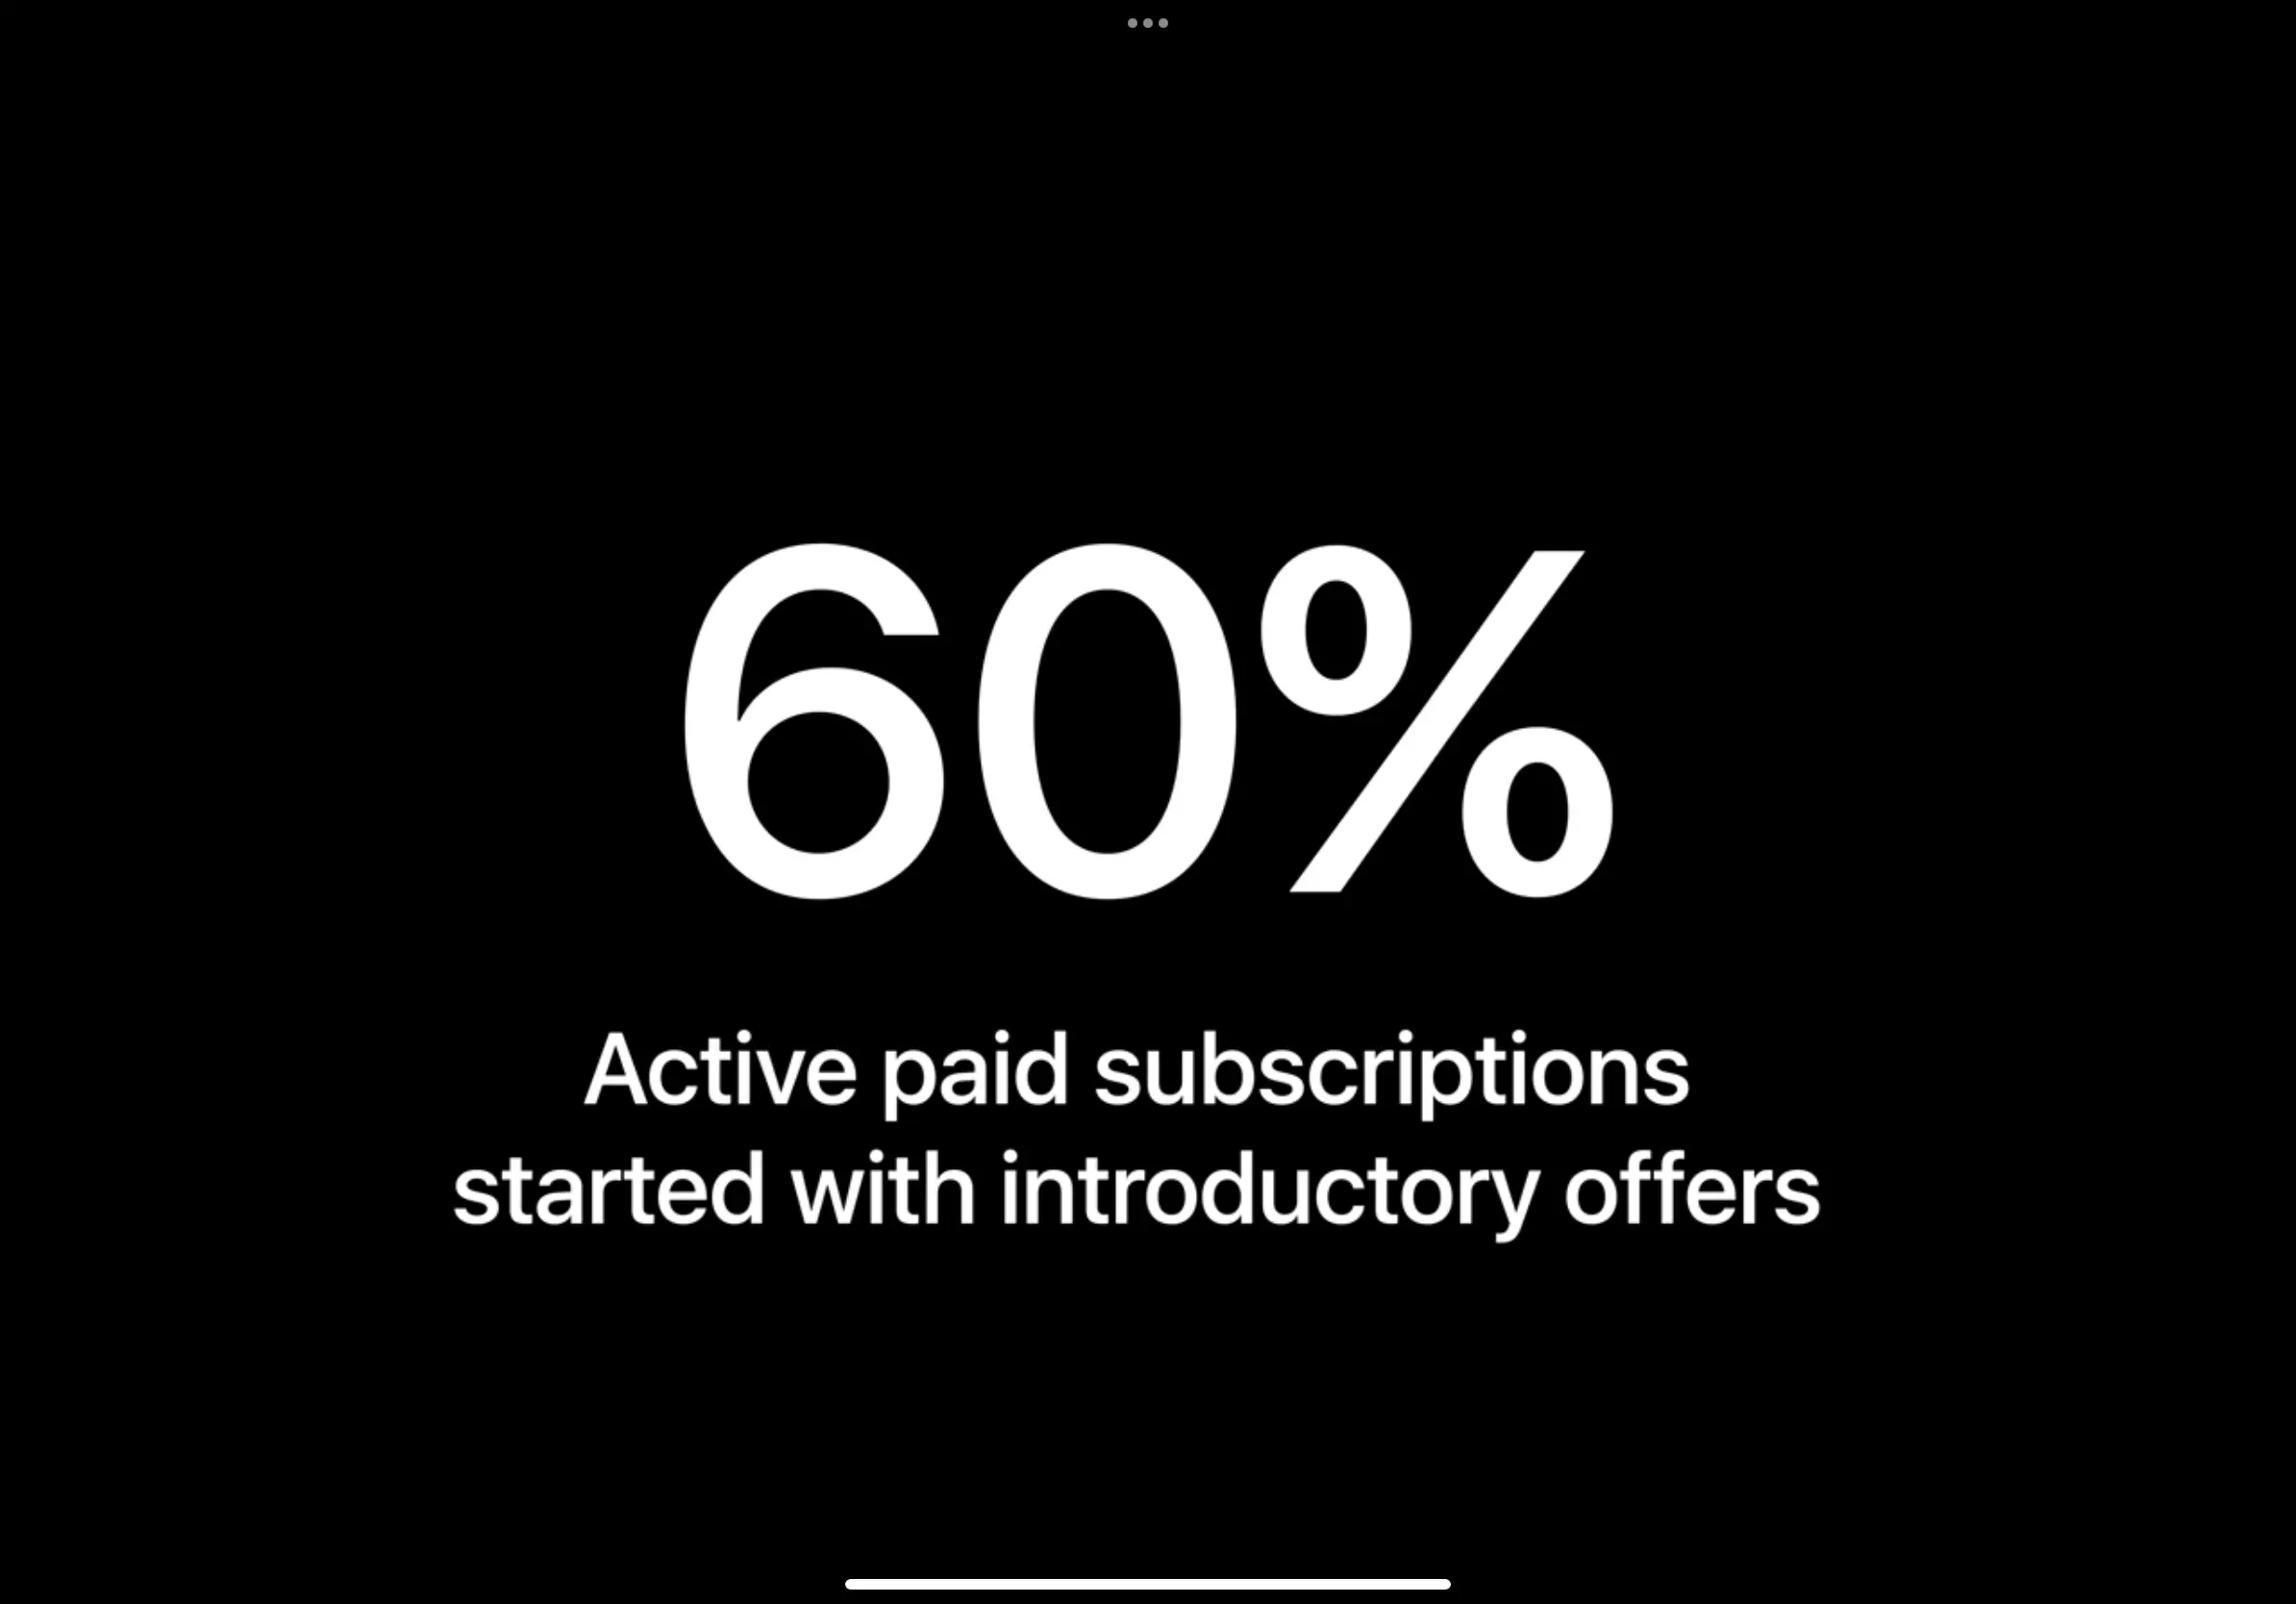 60% of active paid subscriptions started with an introductory offer.